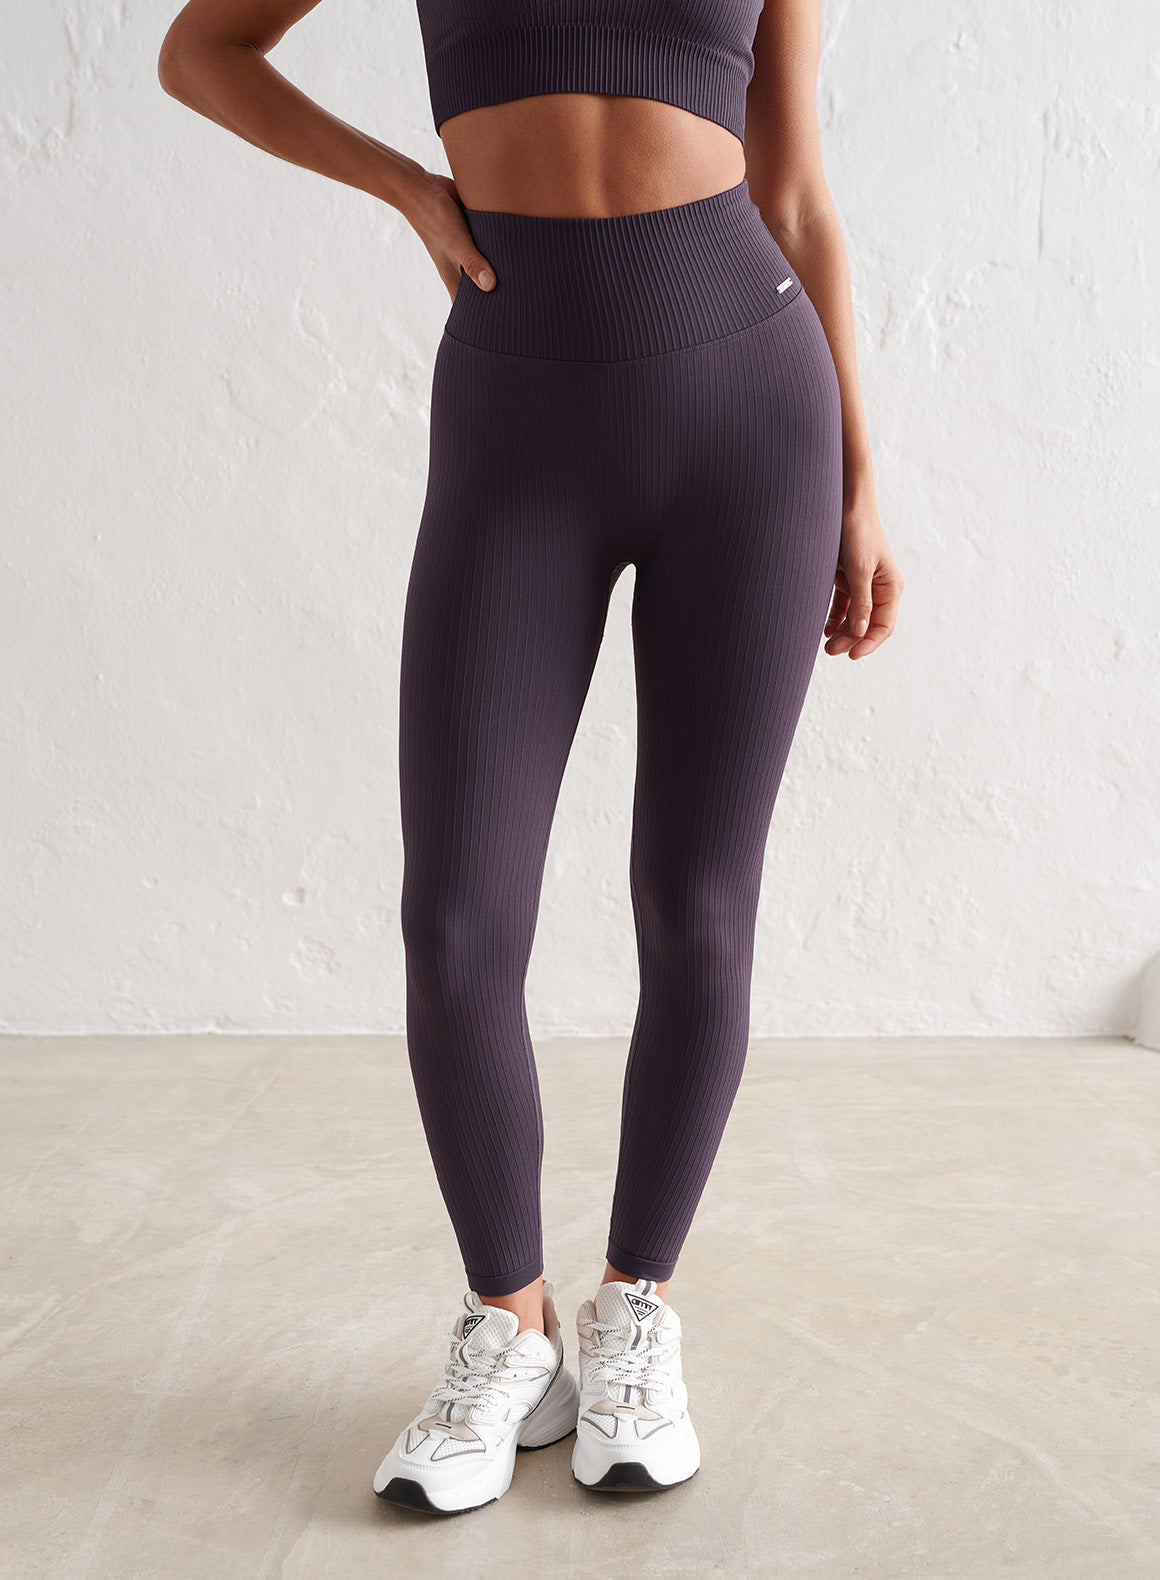 The High-Waisted Cheeky - Fabletics